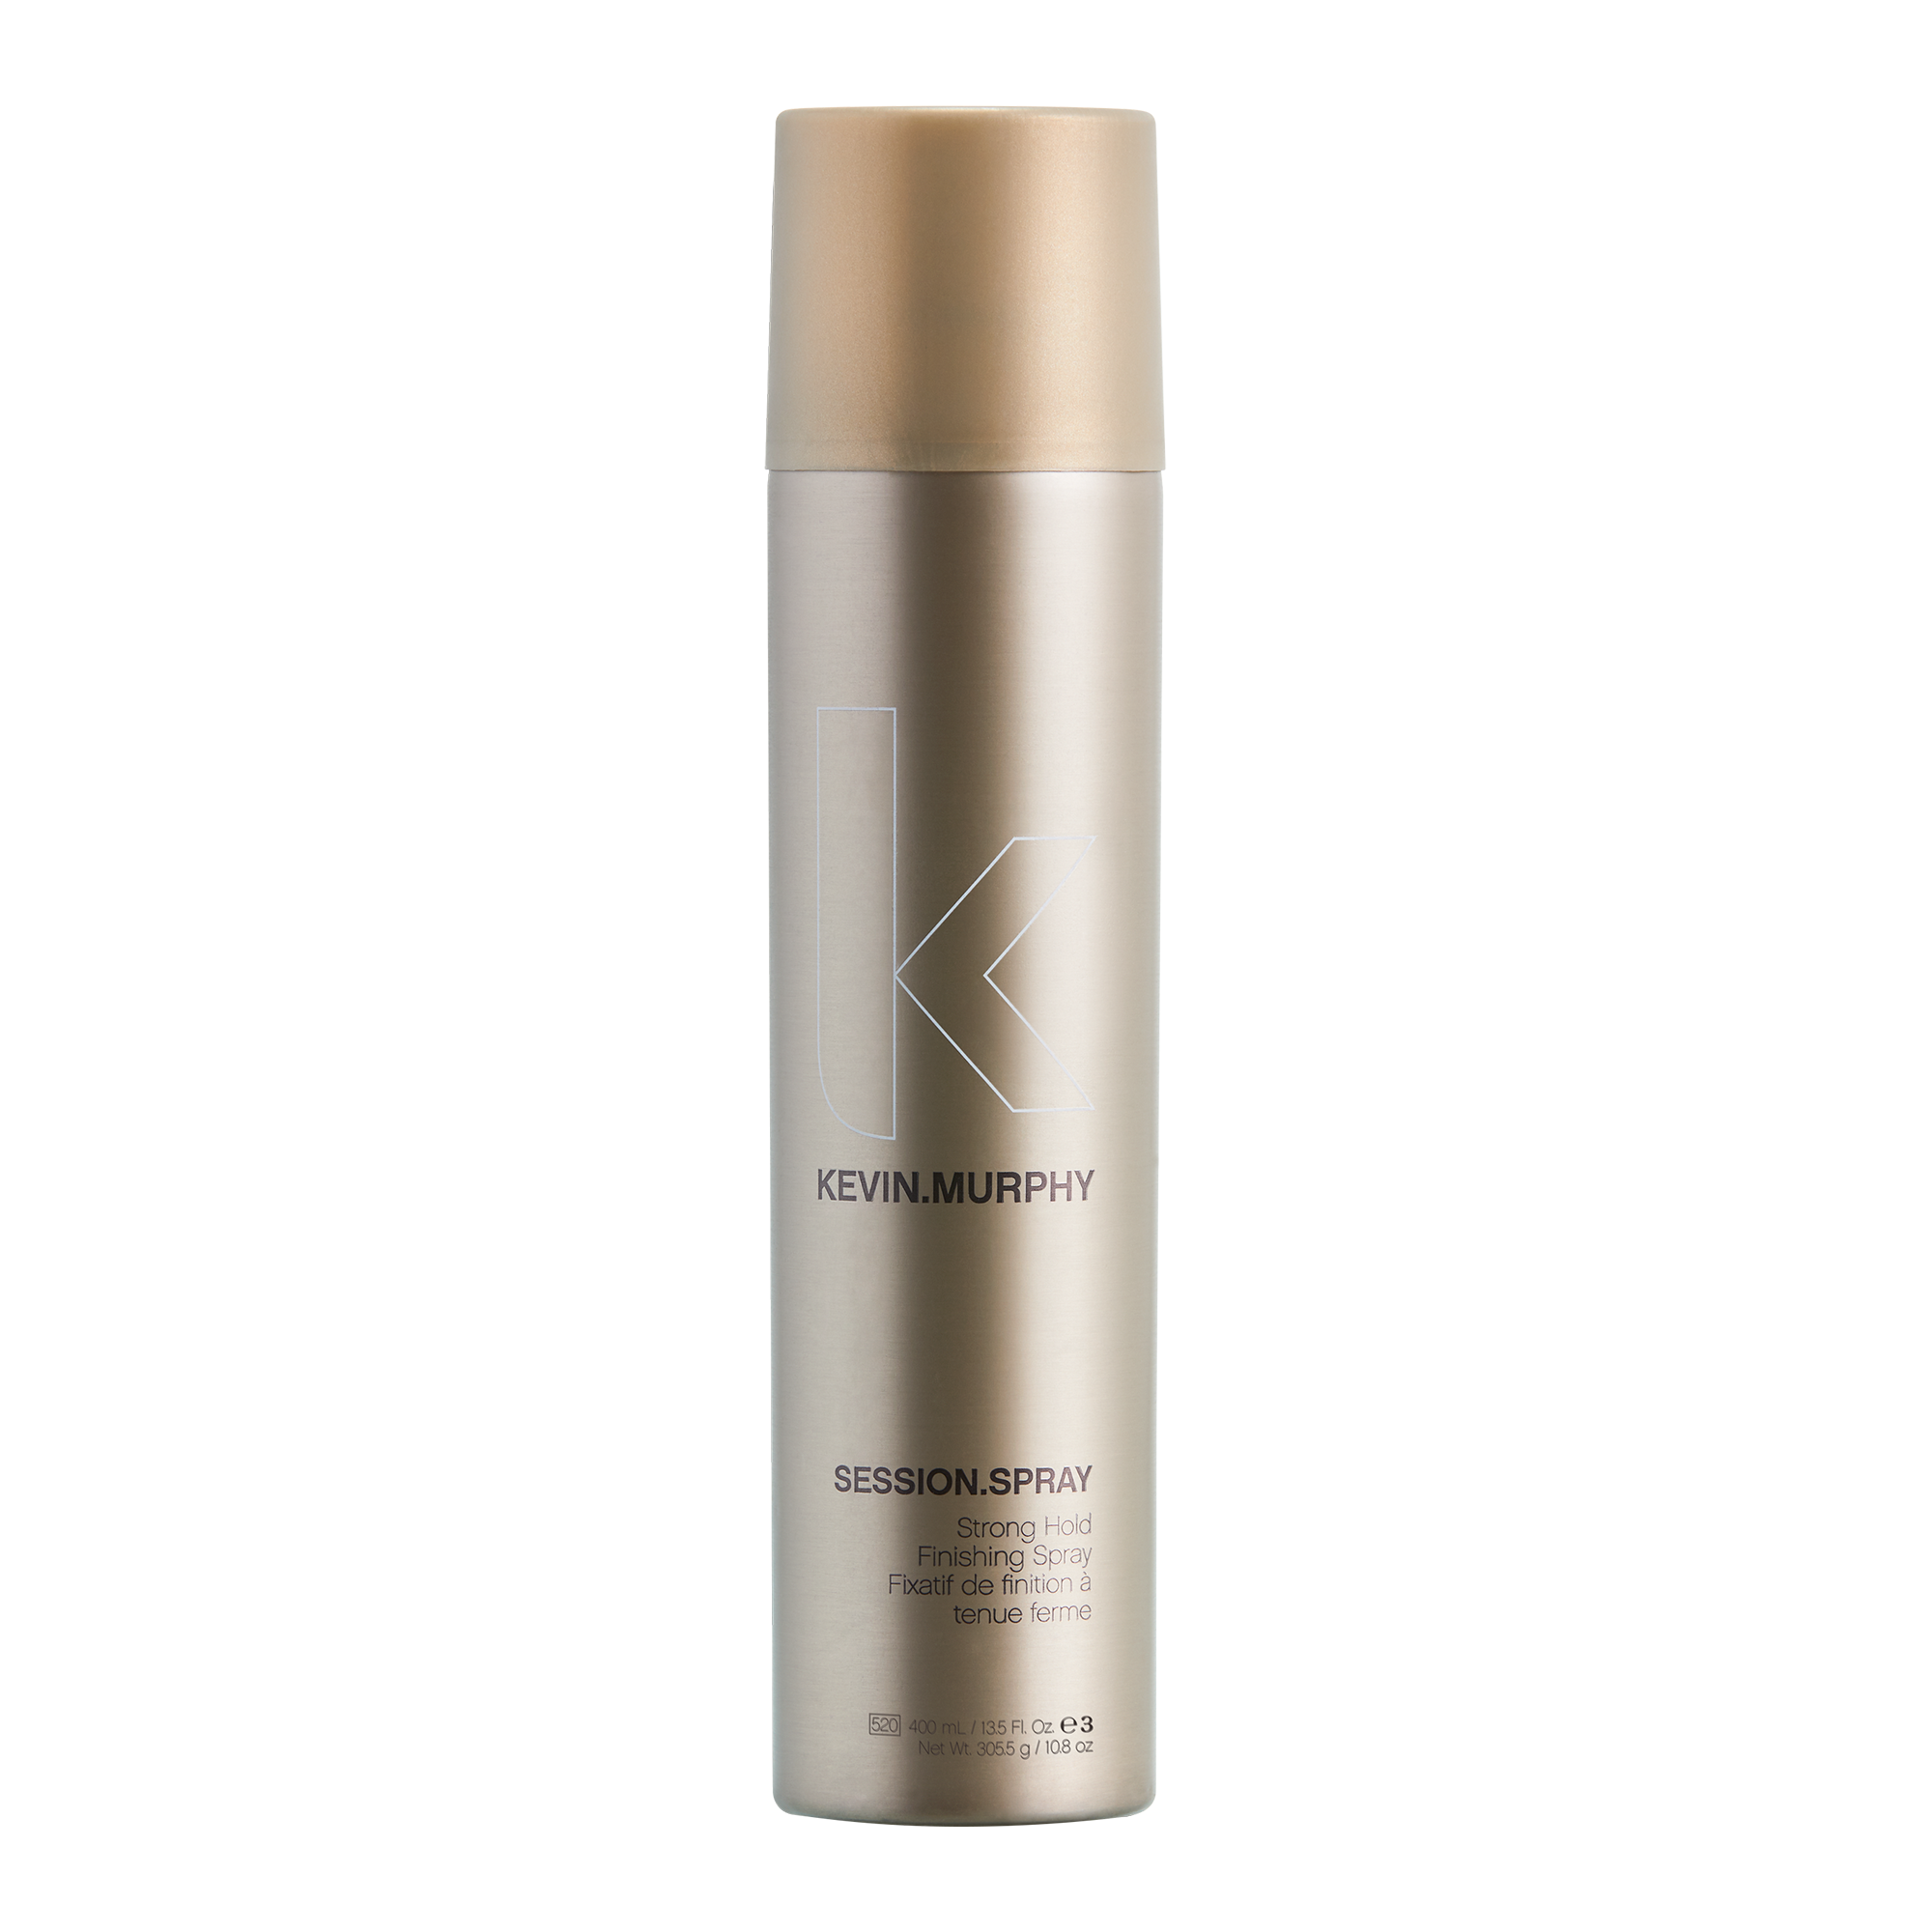 Kevin Murphy - Session.Spray 400 ml.